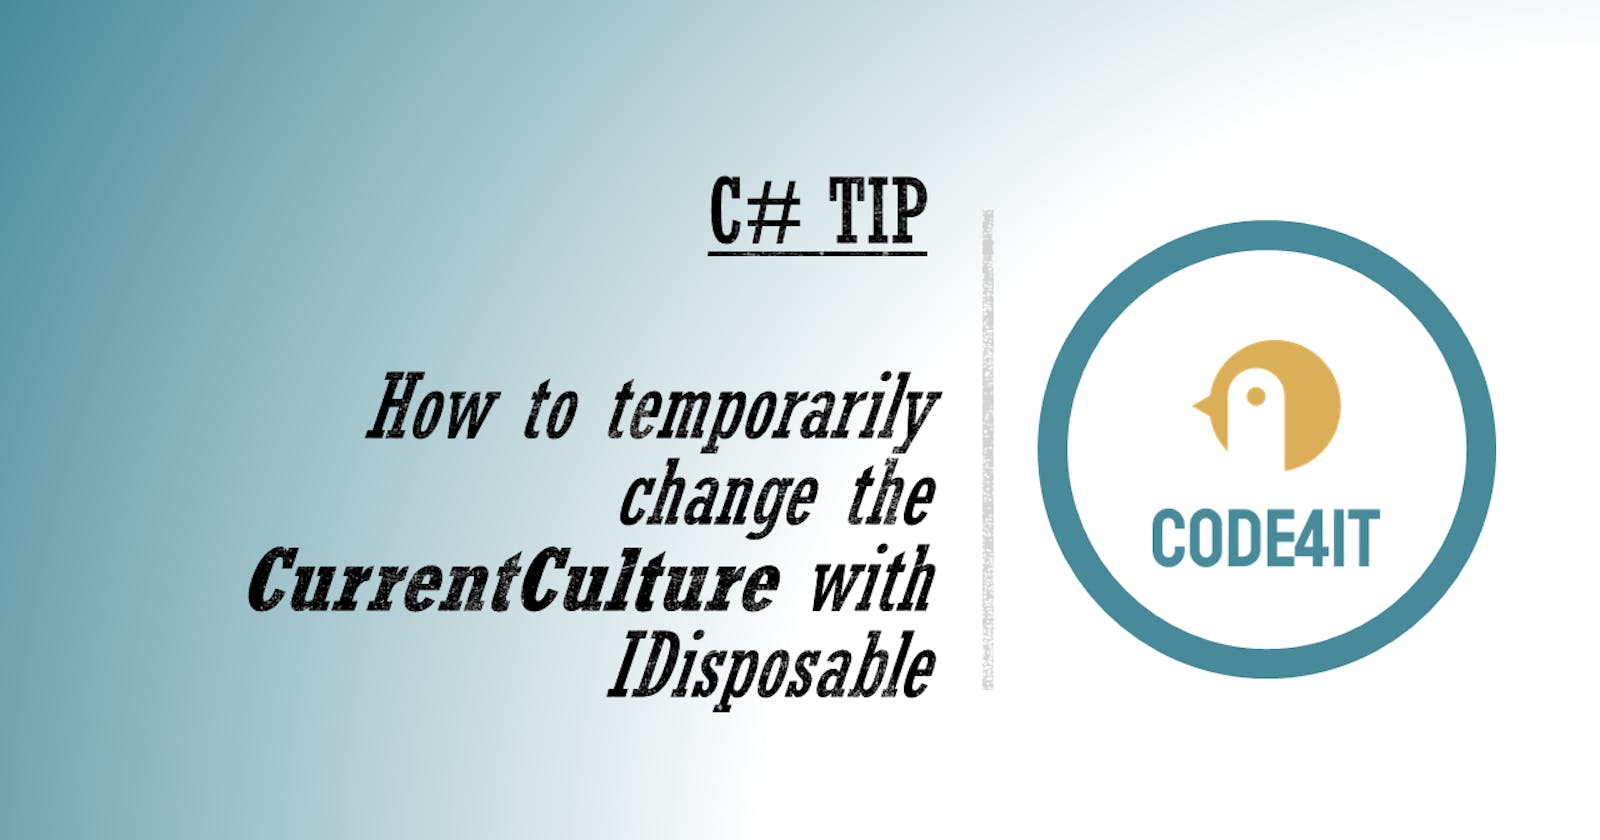 C# Tip: How to temporarily change the CurrentCulture